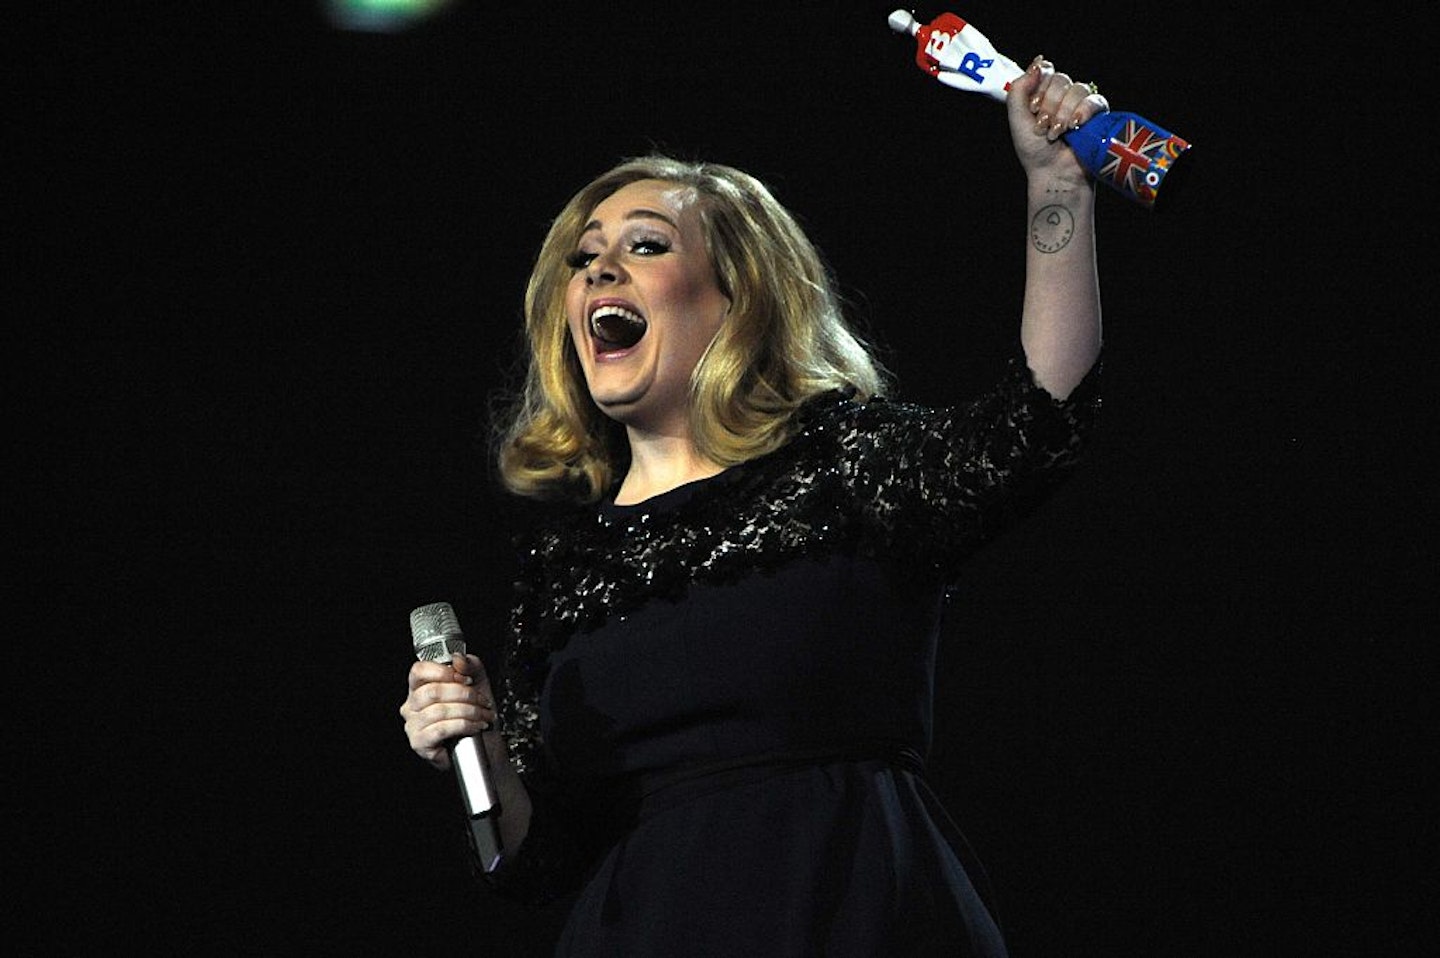 The 10 Most Memorable Moments From Past Brit Awards